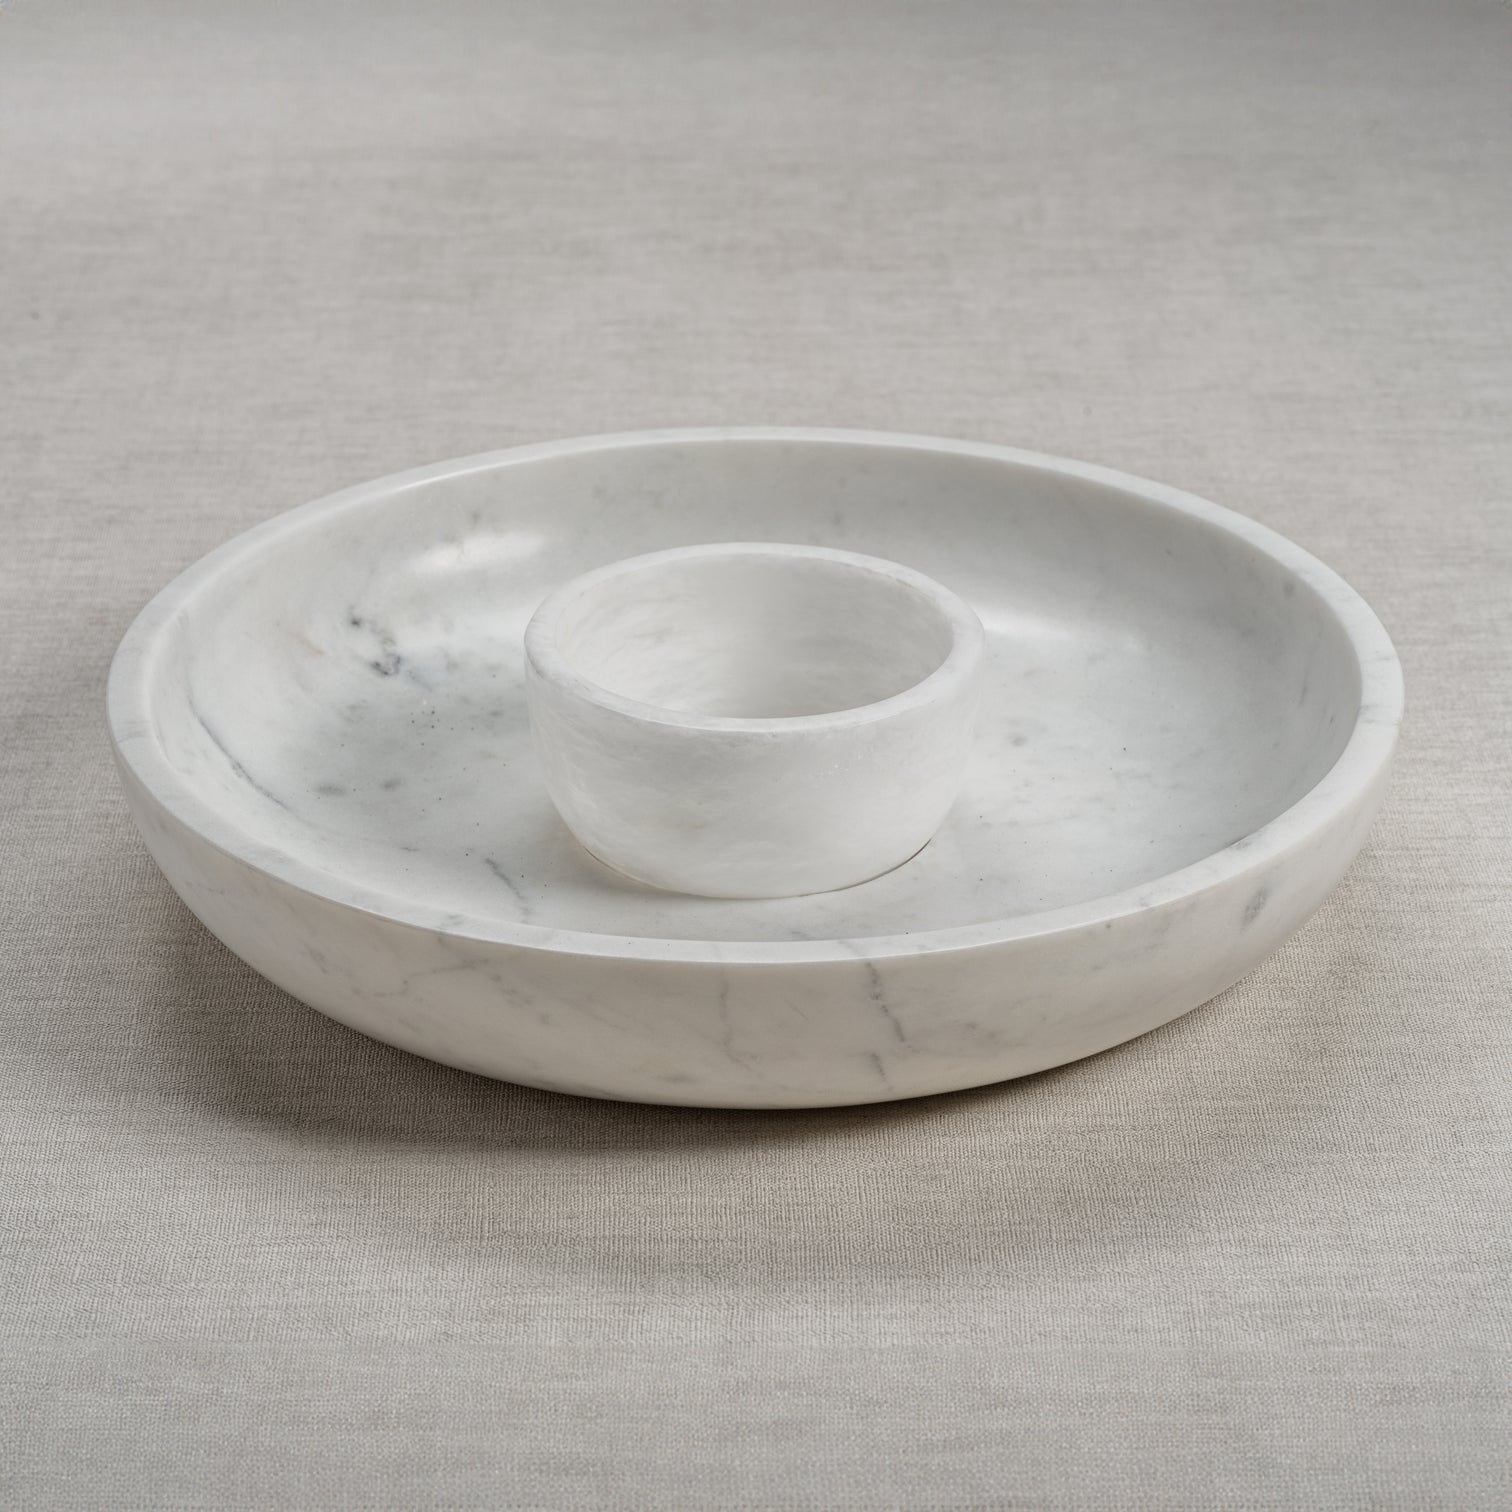 Roma White Marble Chip and Dip Bowl